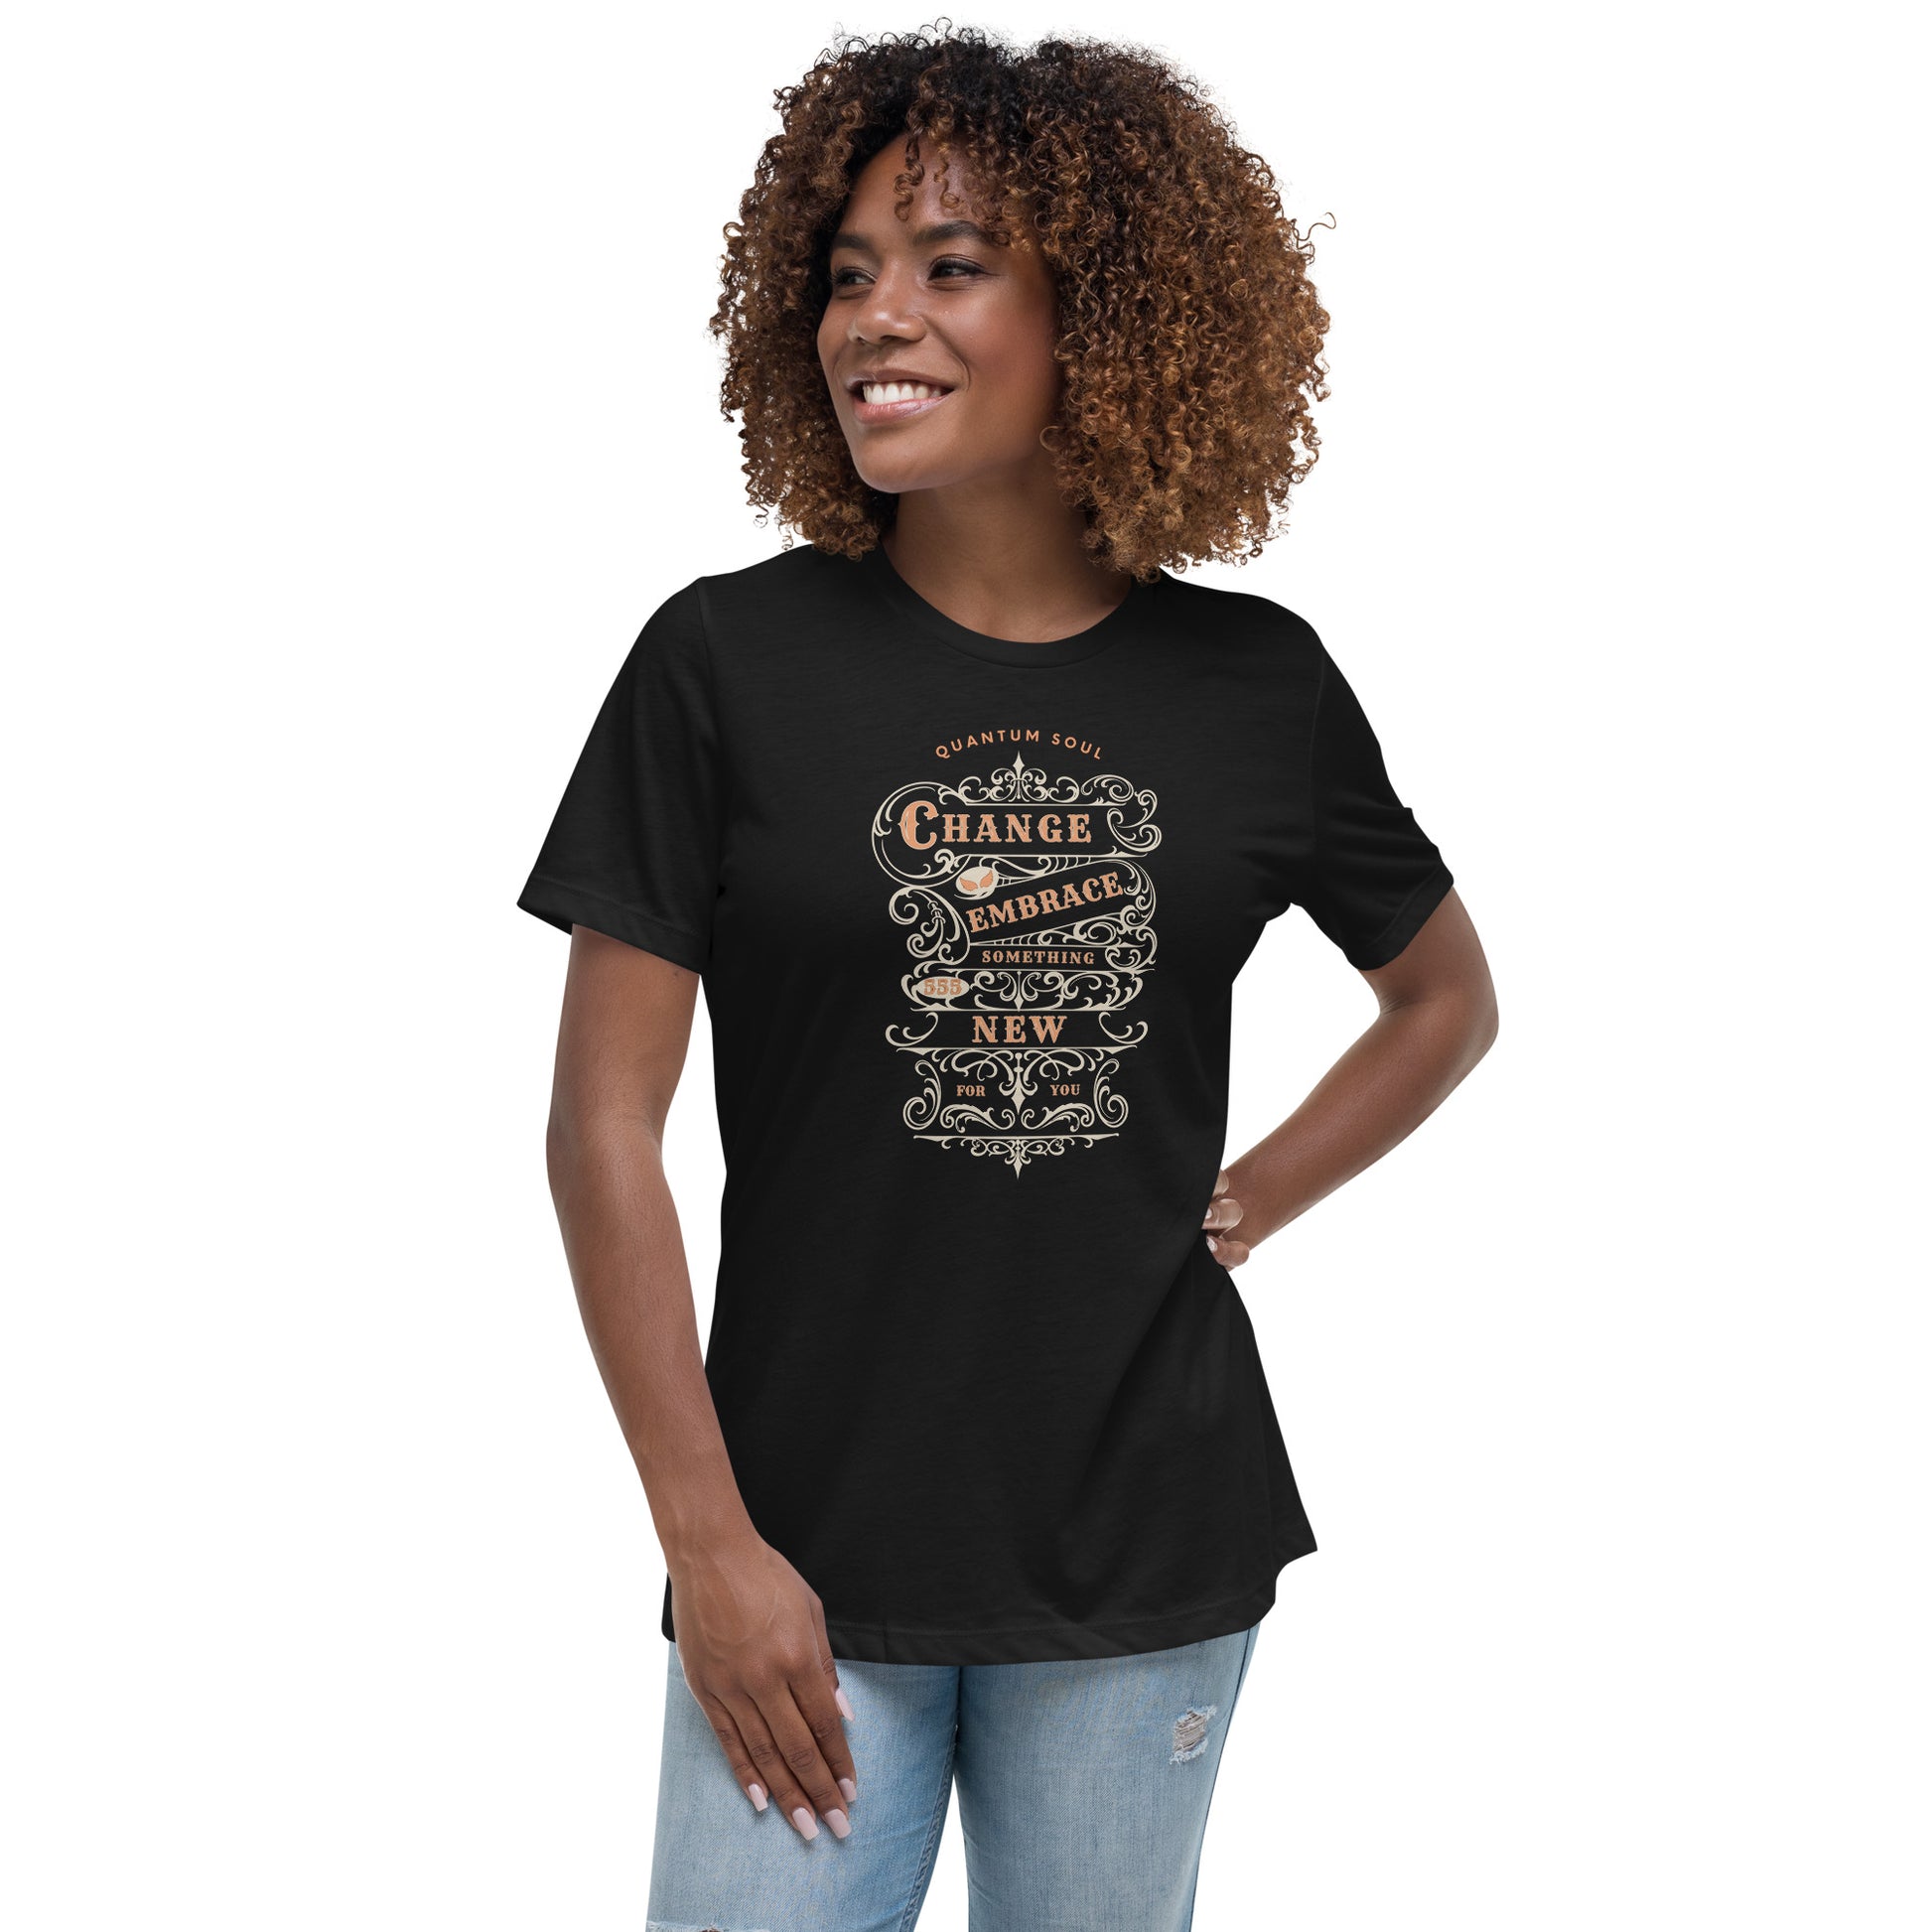 Change 555 womens-relaxed-t-shirt-black-front